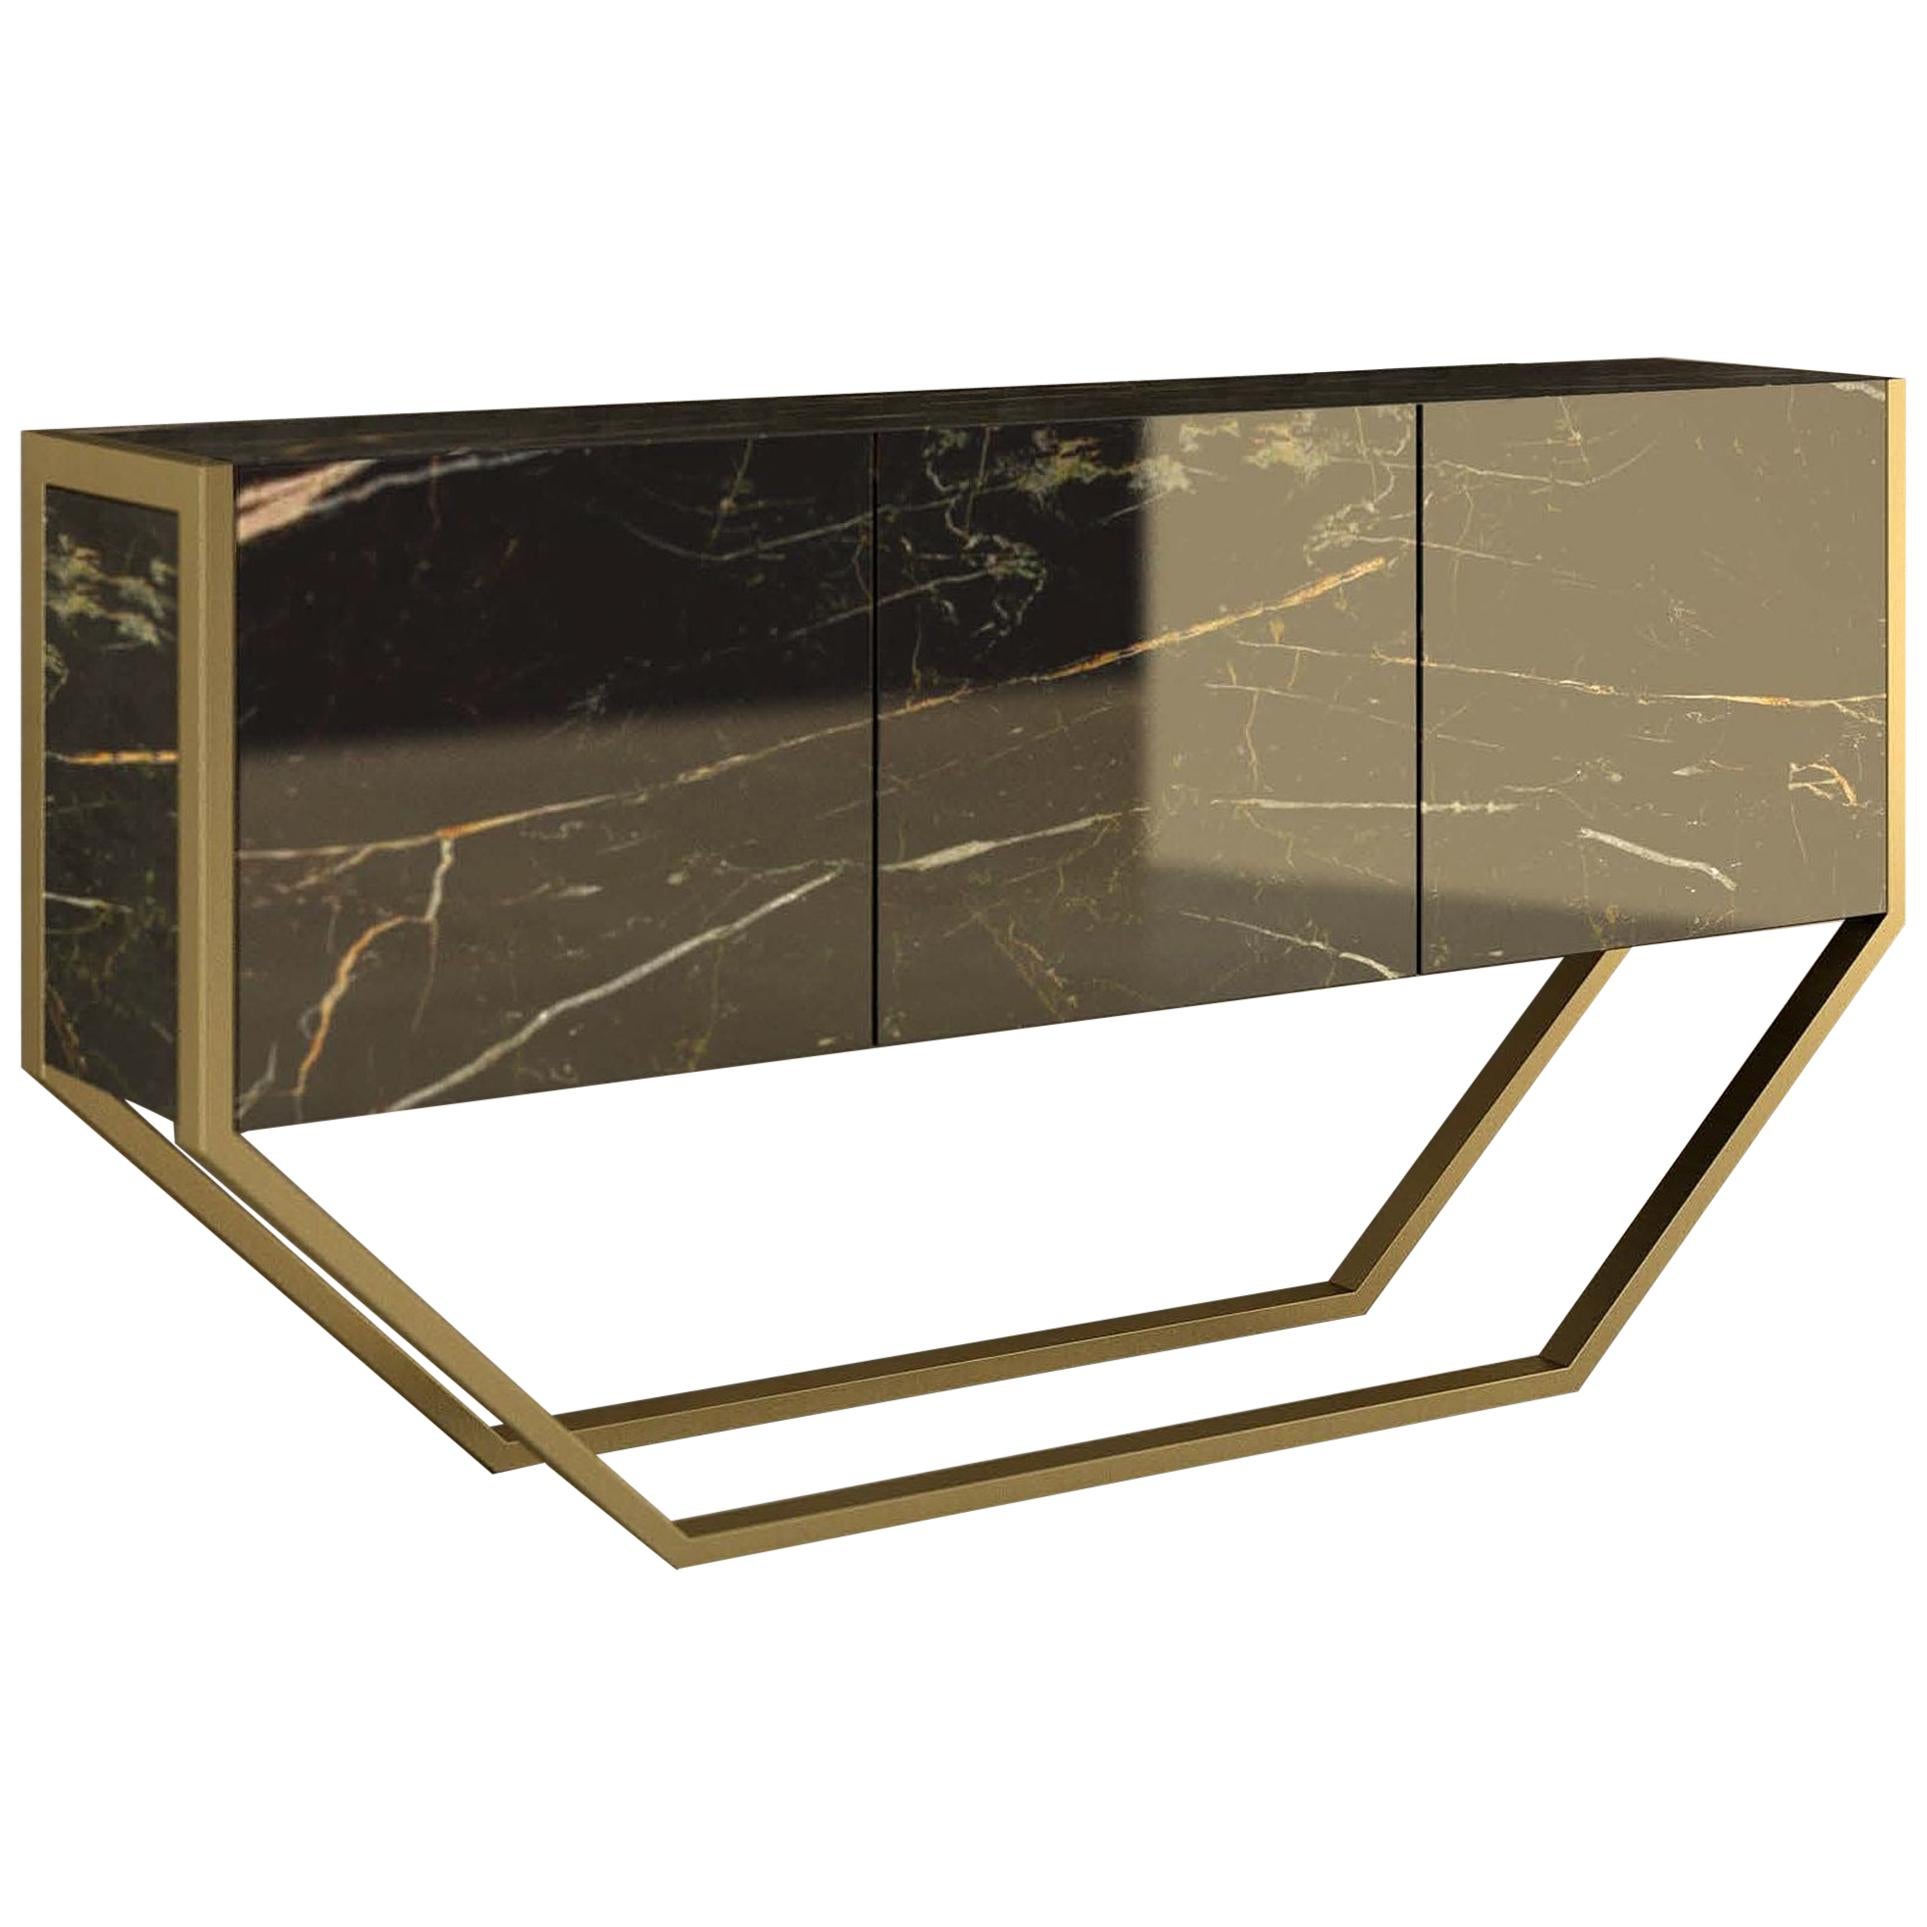 Giovannozzi Home, Consolle "VANILLA" Black Marble and Metal Brass Finish - Italy